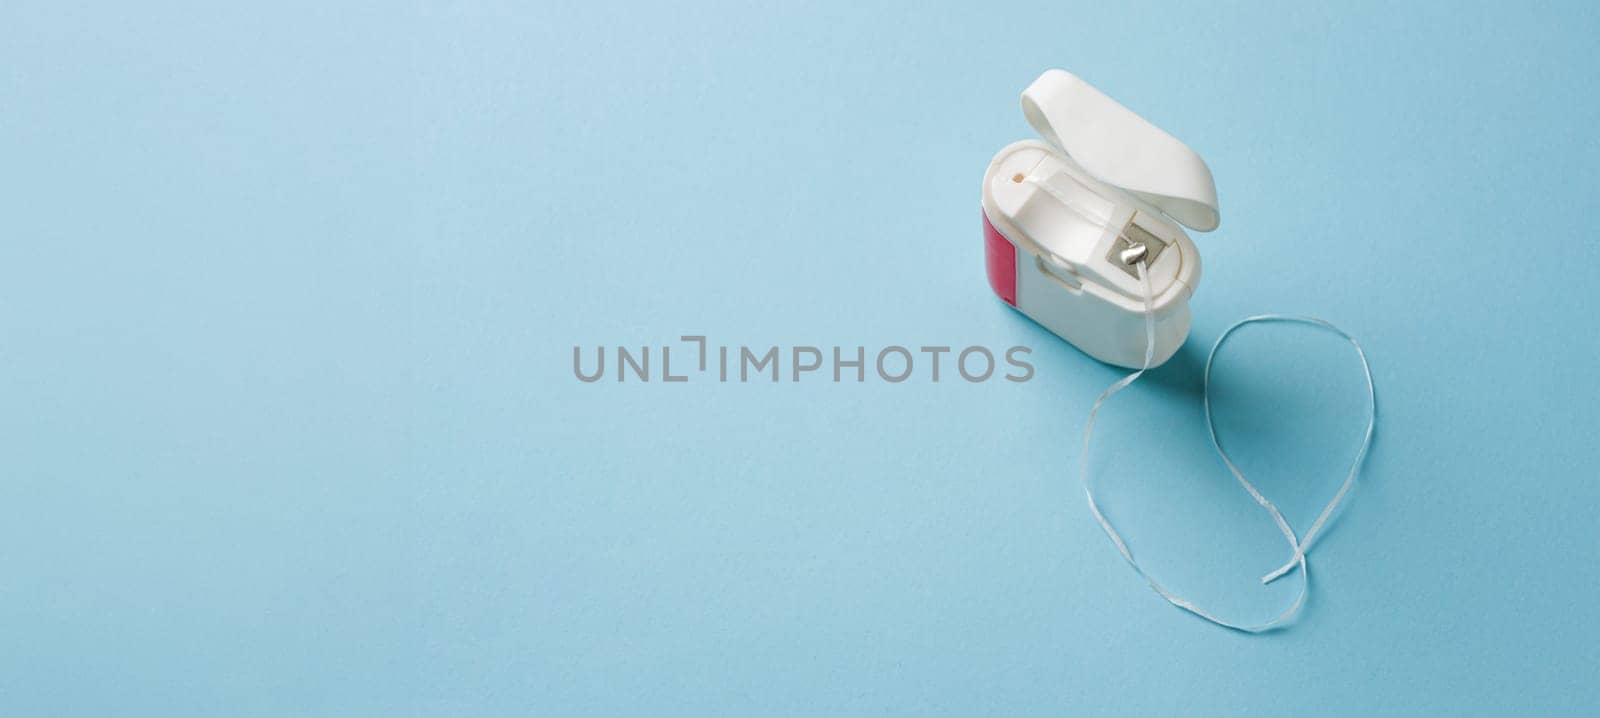 Top view of dental floss in white box on blue background by Sonat